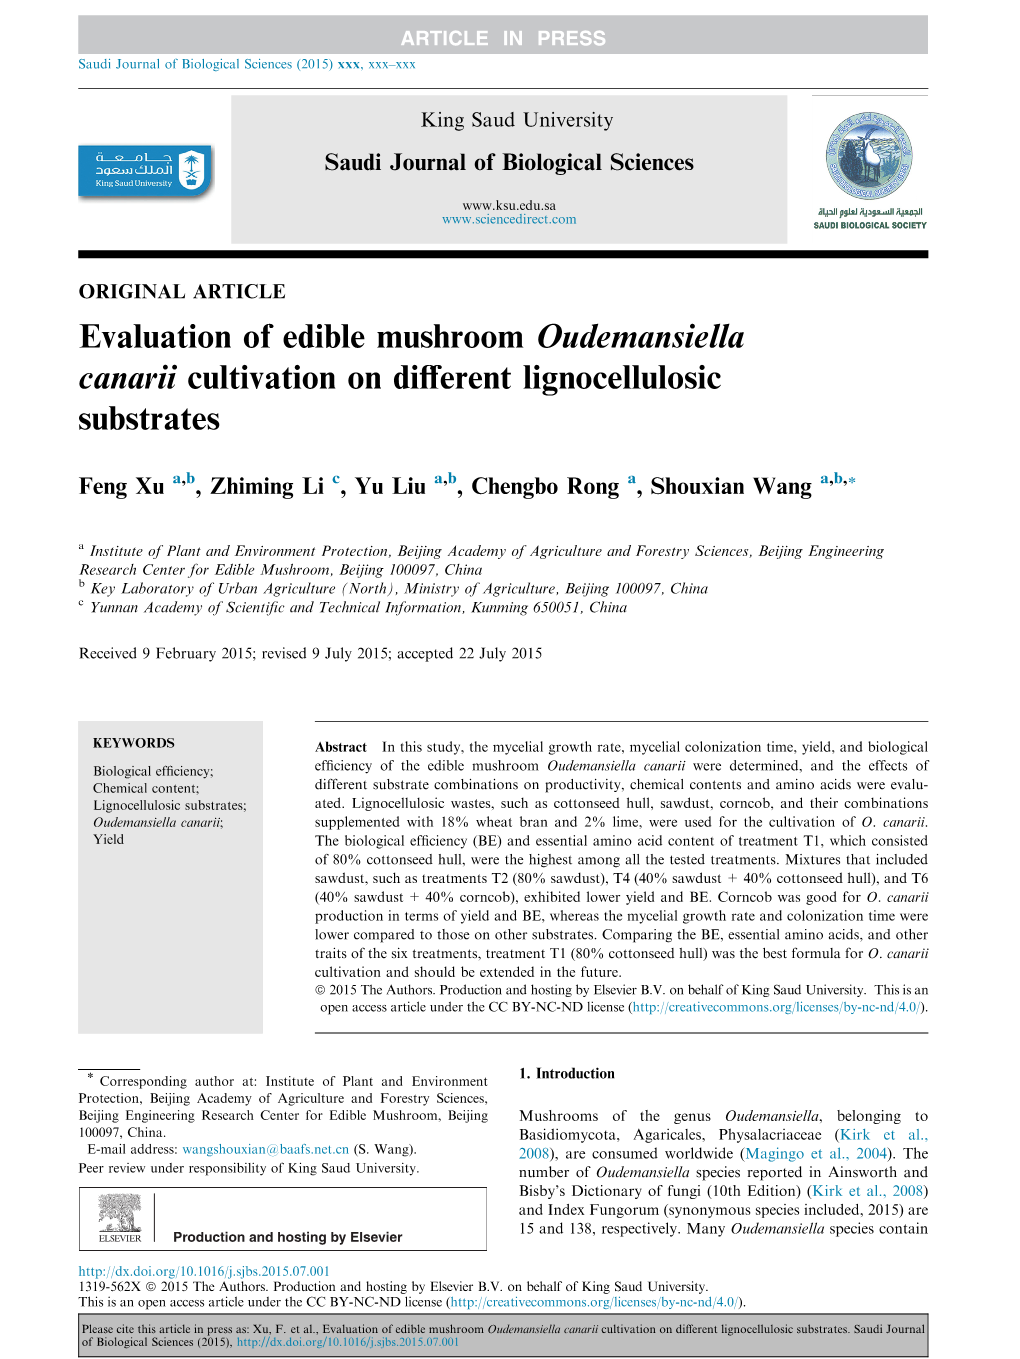 Evaluation of Edible Mushroom Oudemansiella Canarii Cultivation on Diﬀerent Lignocellulosic Substrates